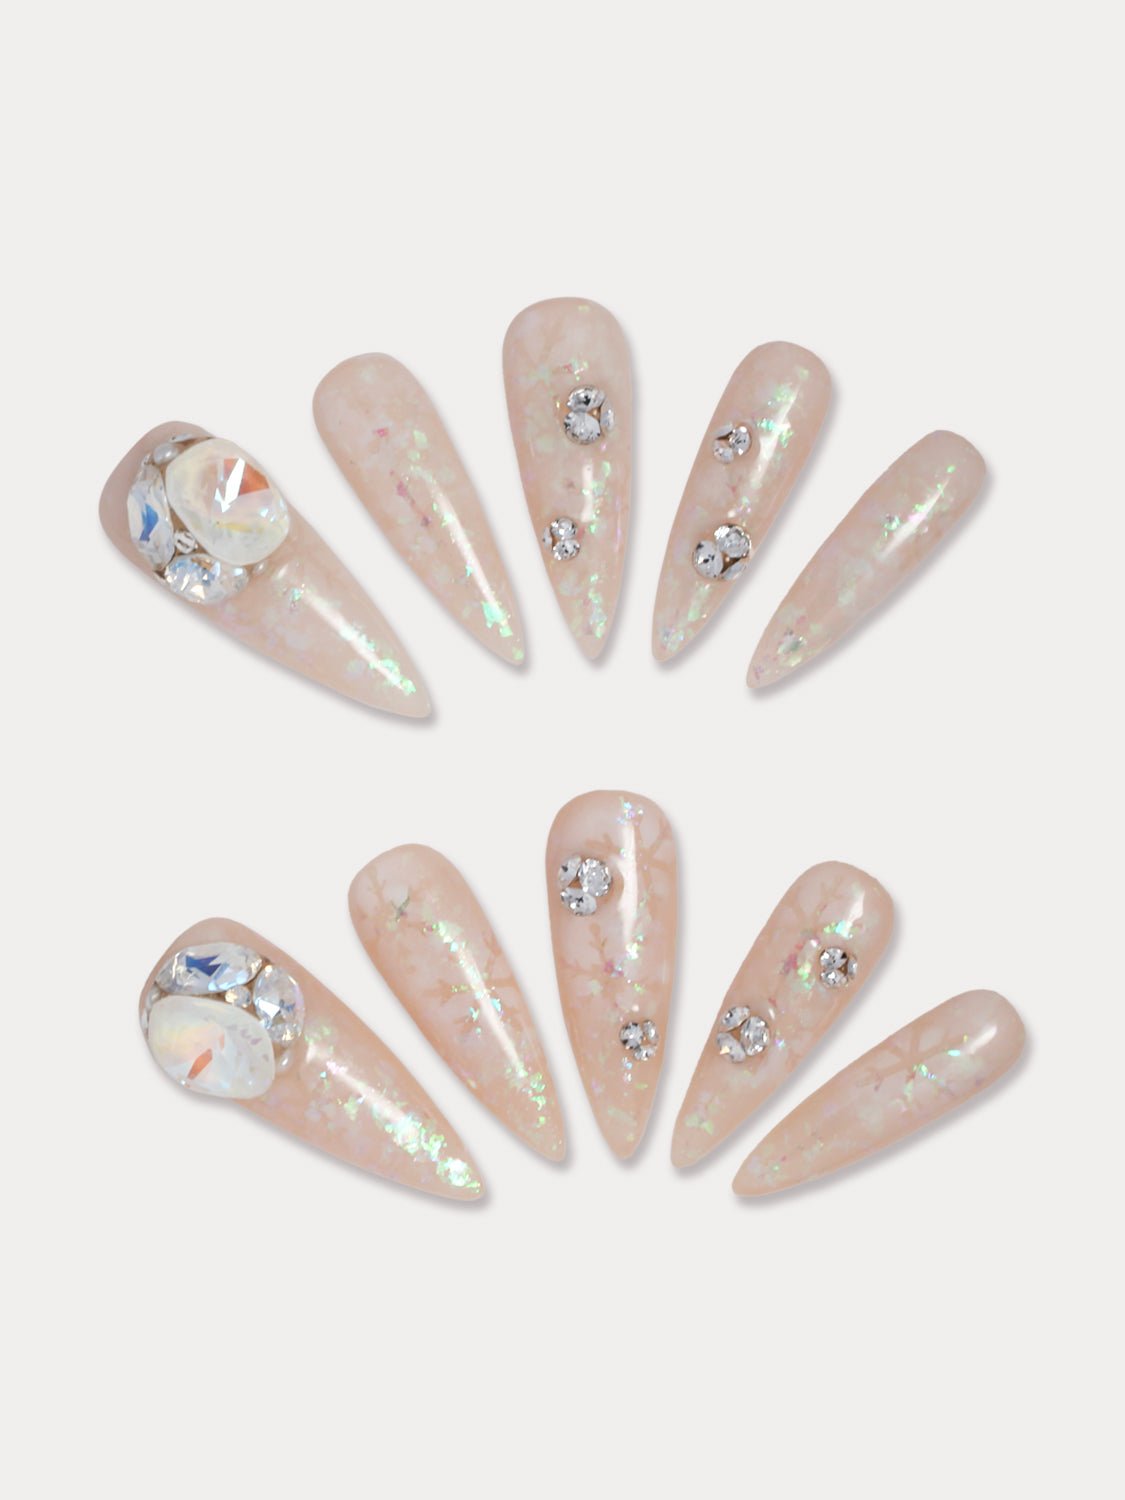 White Press on Nails With Rhinestones 